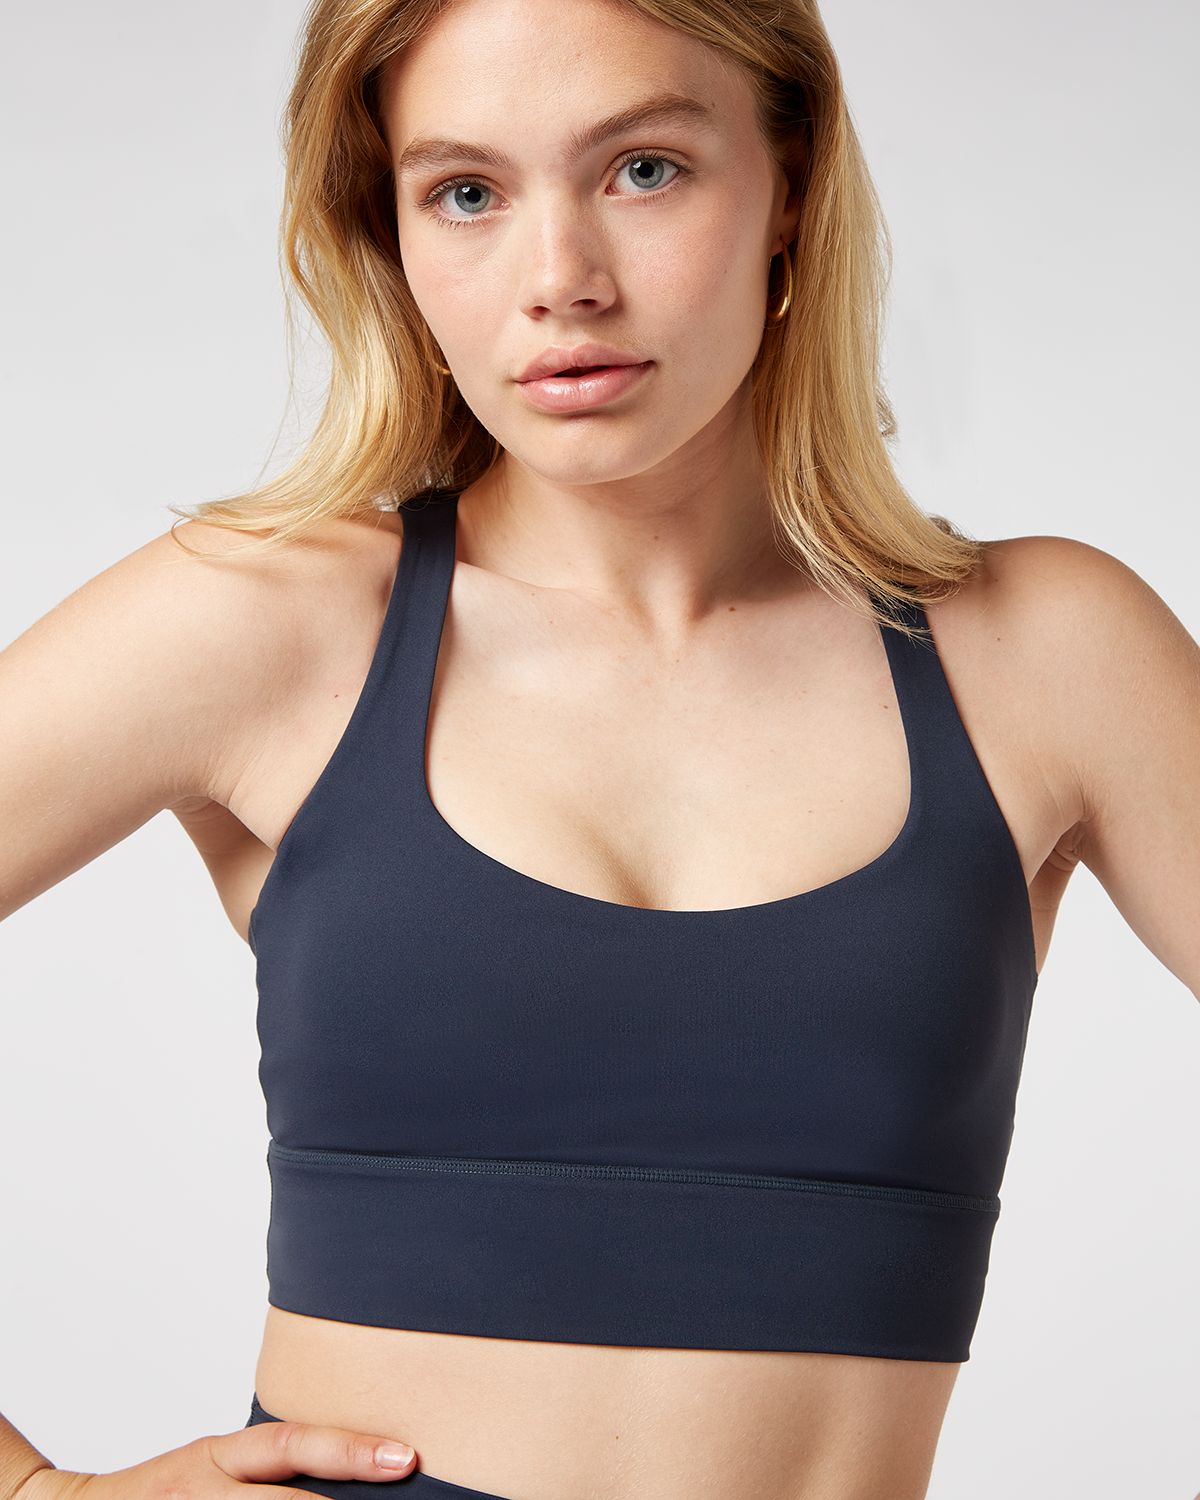 Carbon38 Sayang Canggu Macrame Sports Bra in Dusty Blue Limited Edition  Size S